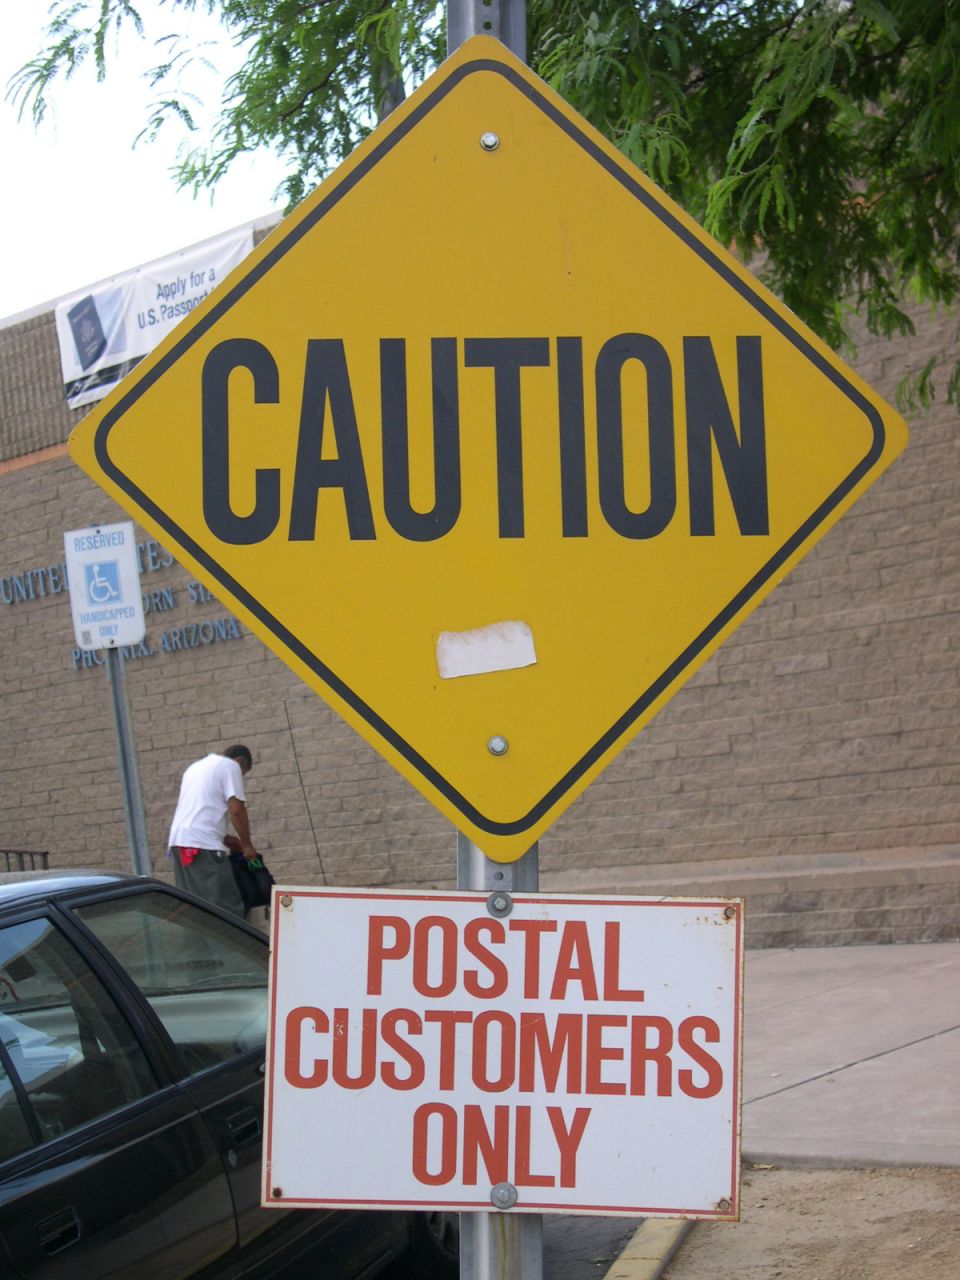 CAUTION: Postal Customers Only
